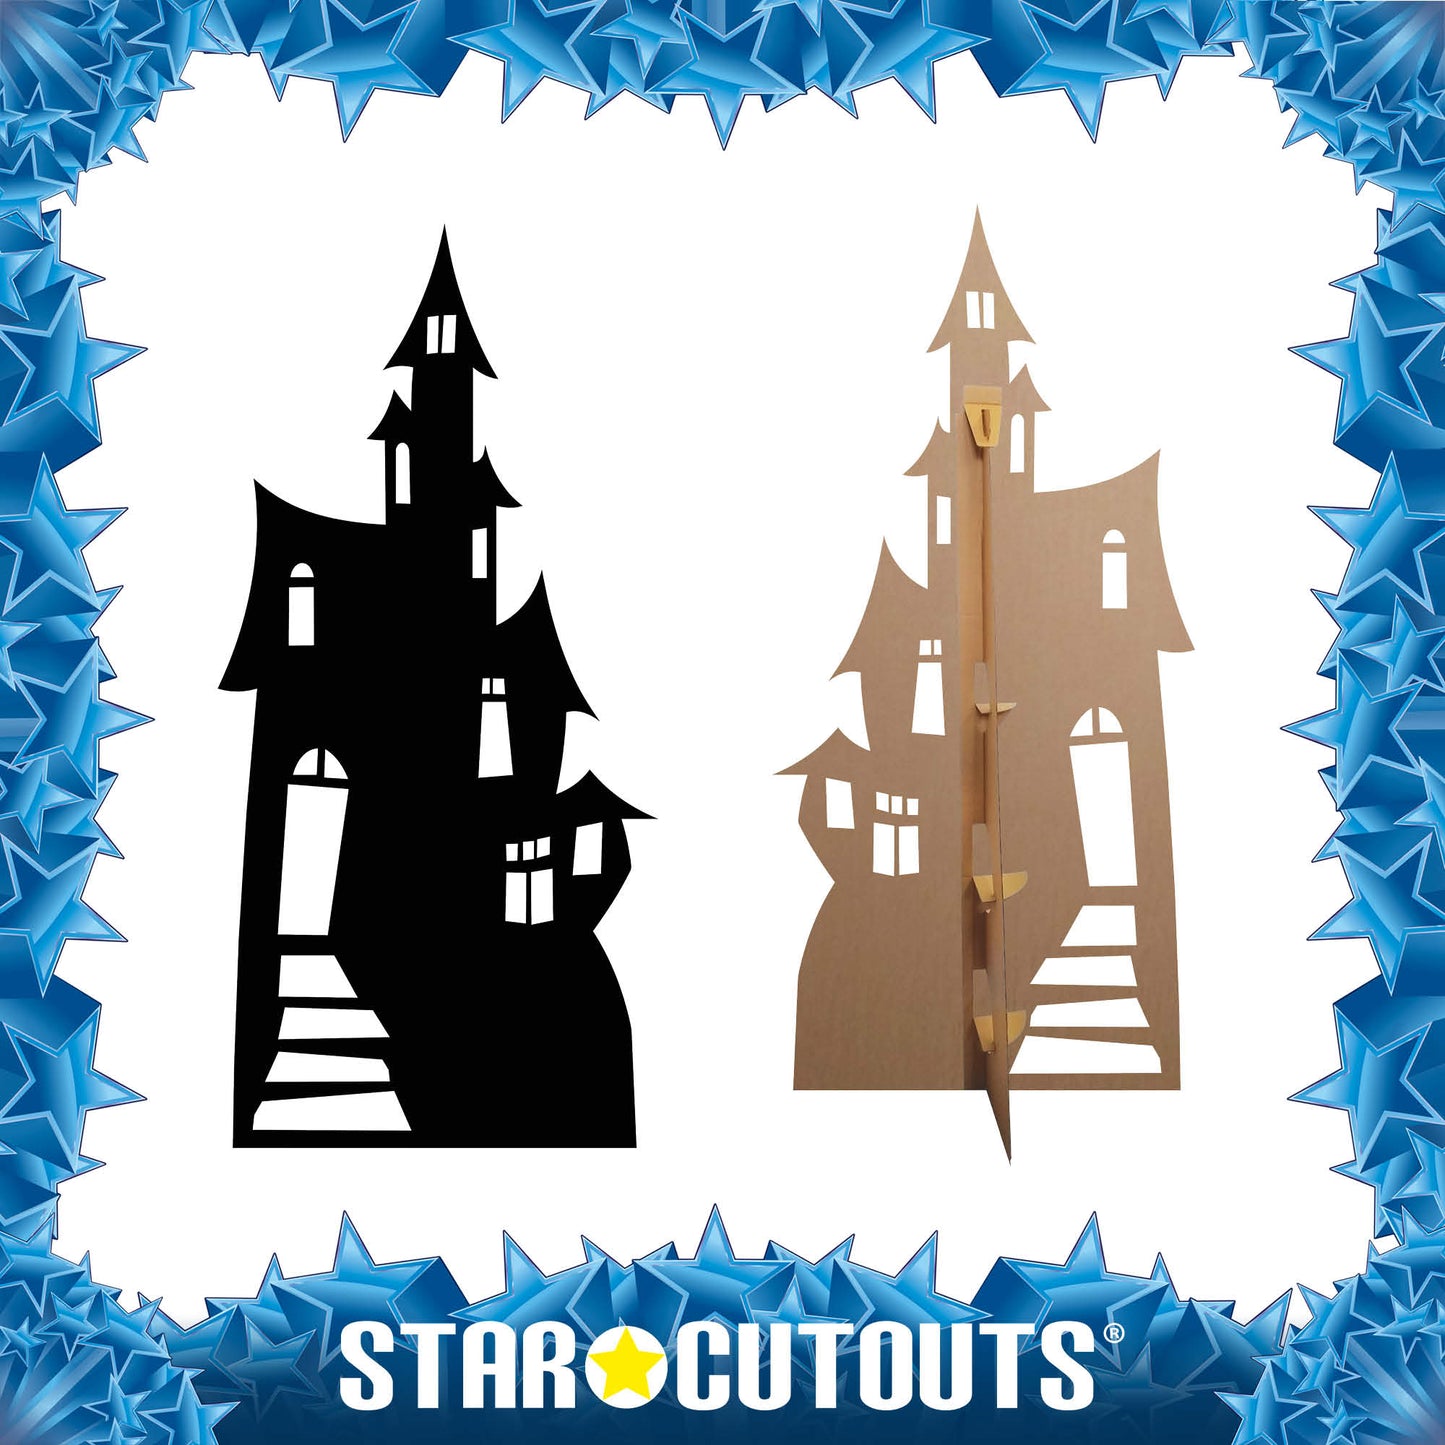 Haunted House Large  Black Silhouette Cutout